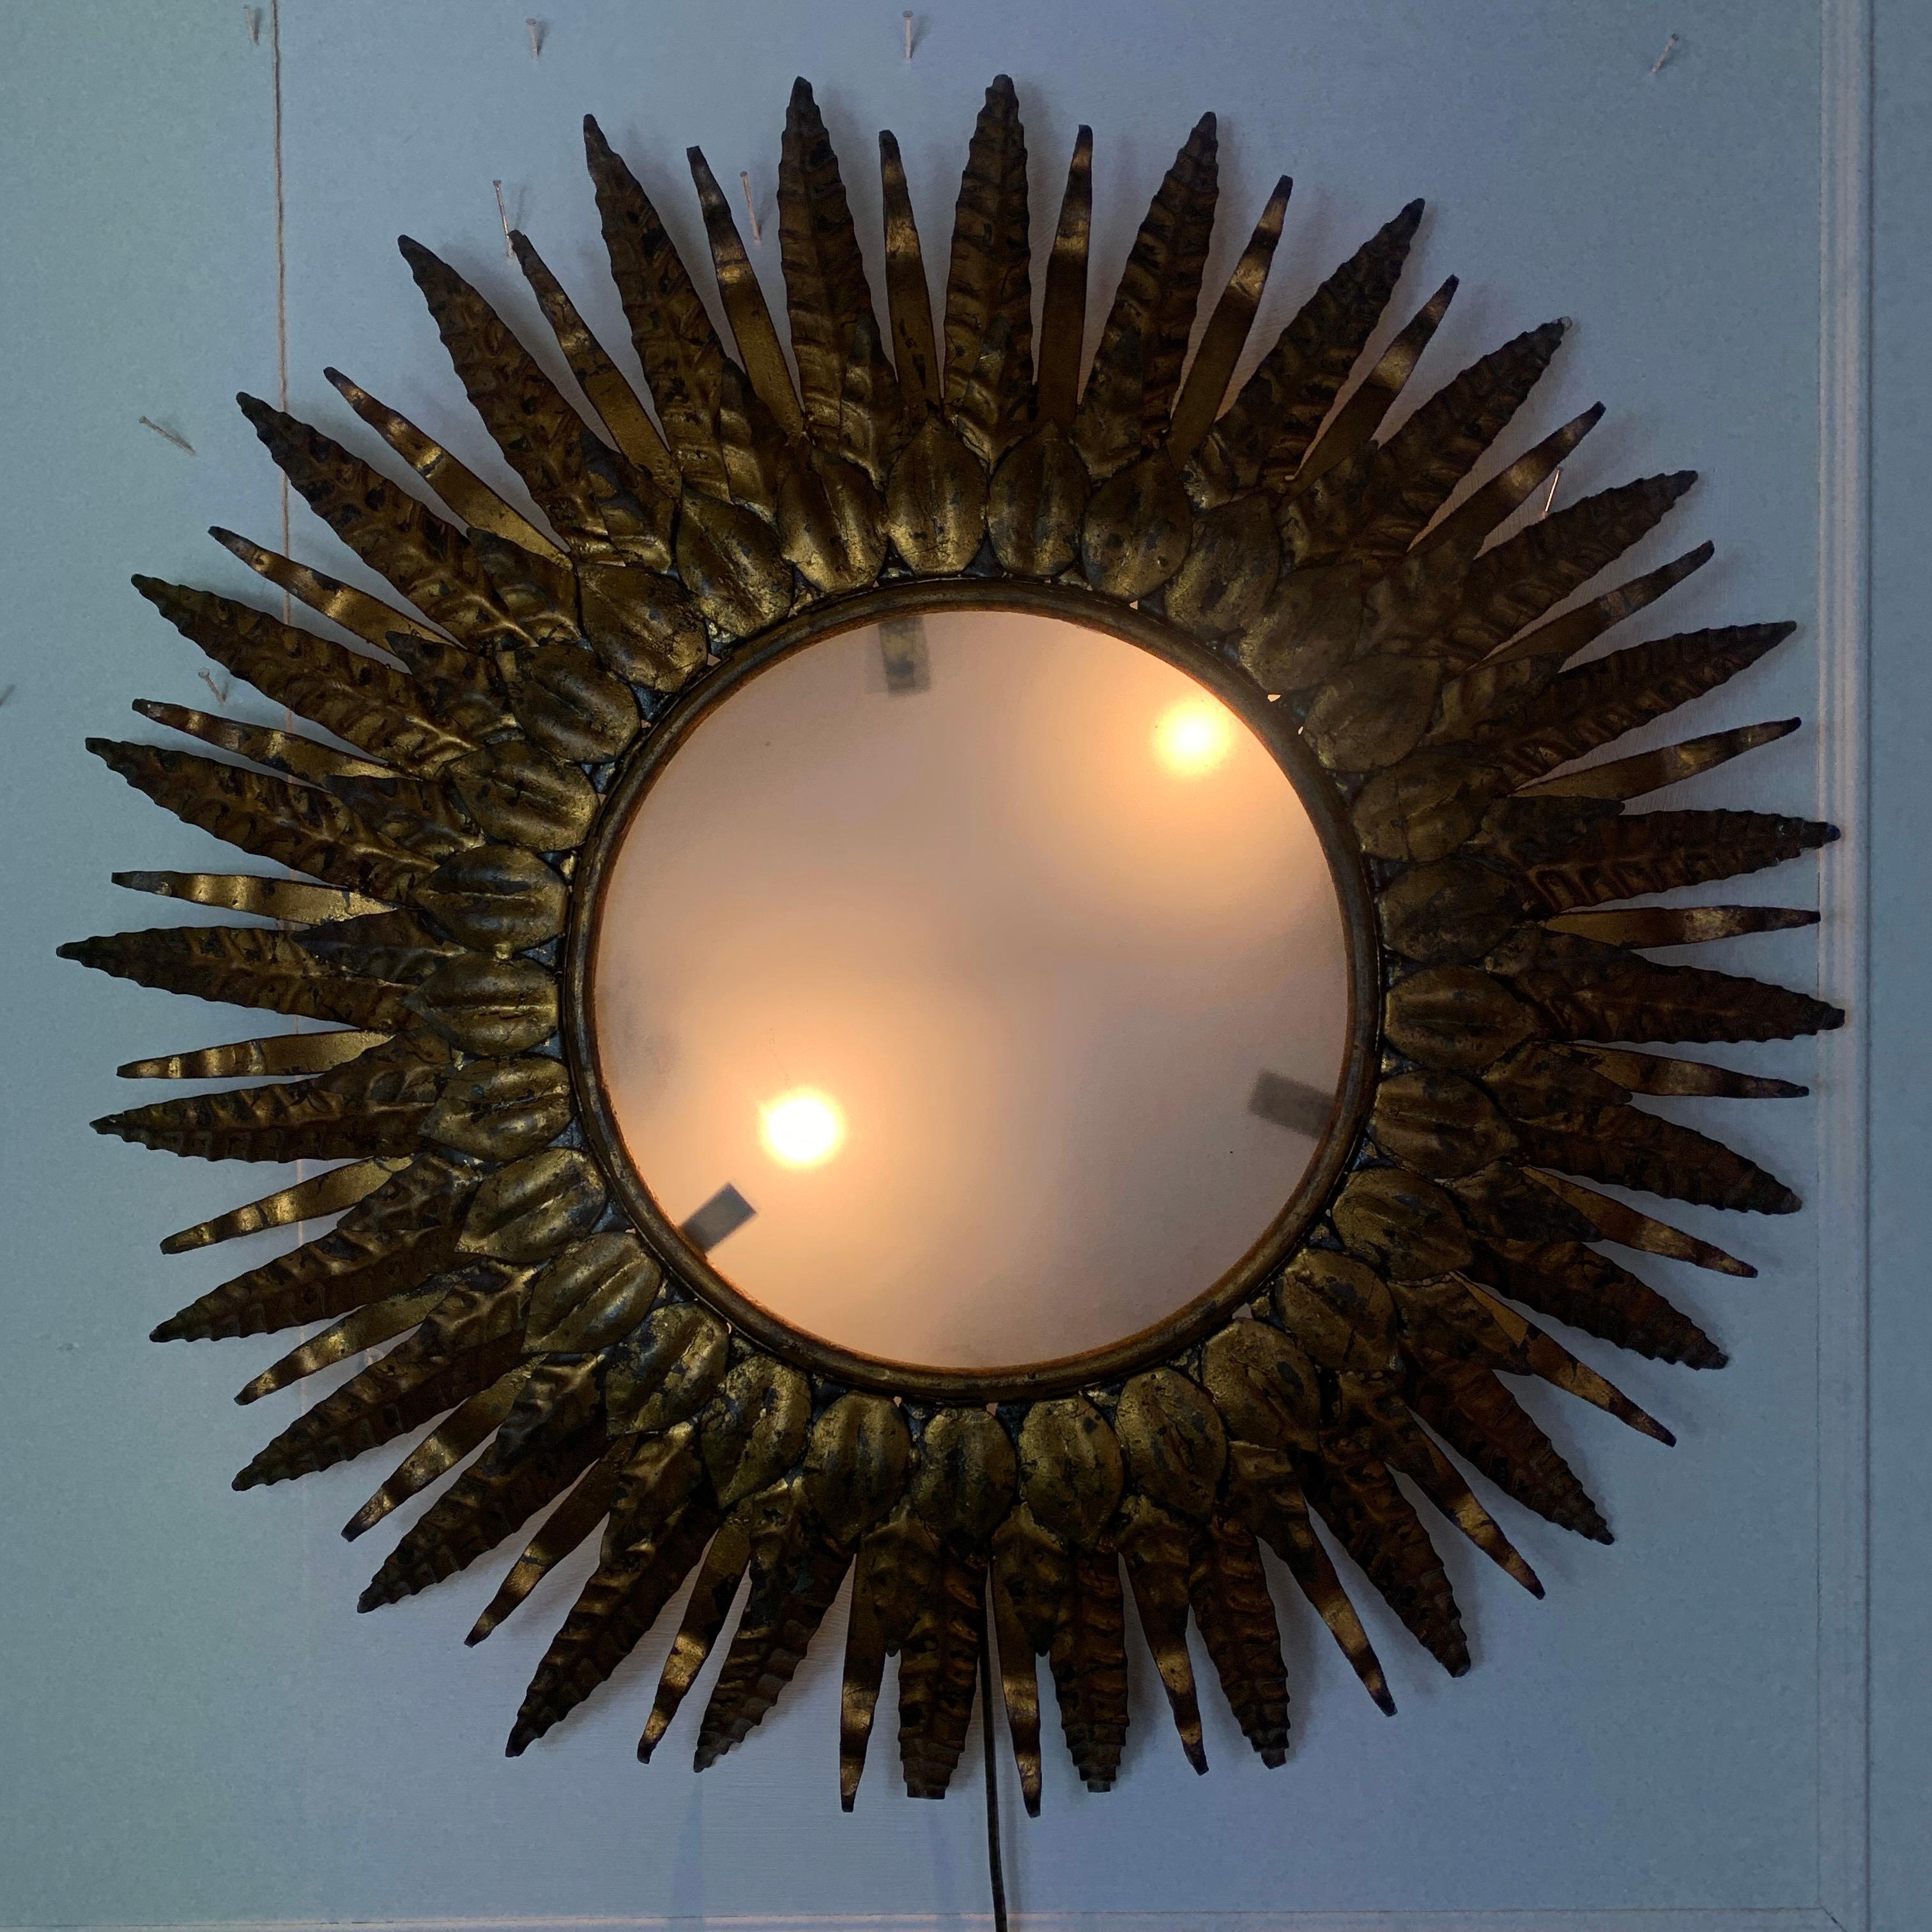 1950s Spanish gilt iron double sunburst ceiling light
An incredible gilt over metal Spanish double sunburst, featuring two lampholders sitting behind the opaque glass
This is a truly wonderful, and exceptionally well made example of a vintage